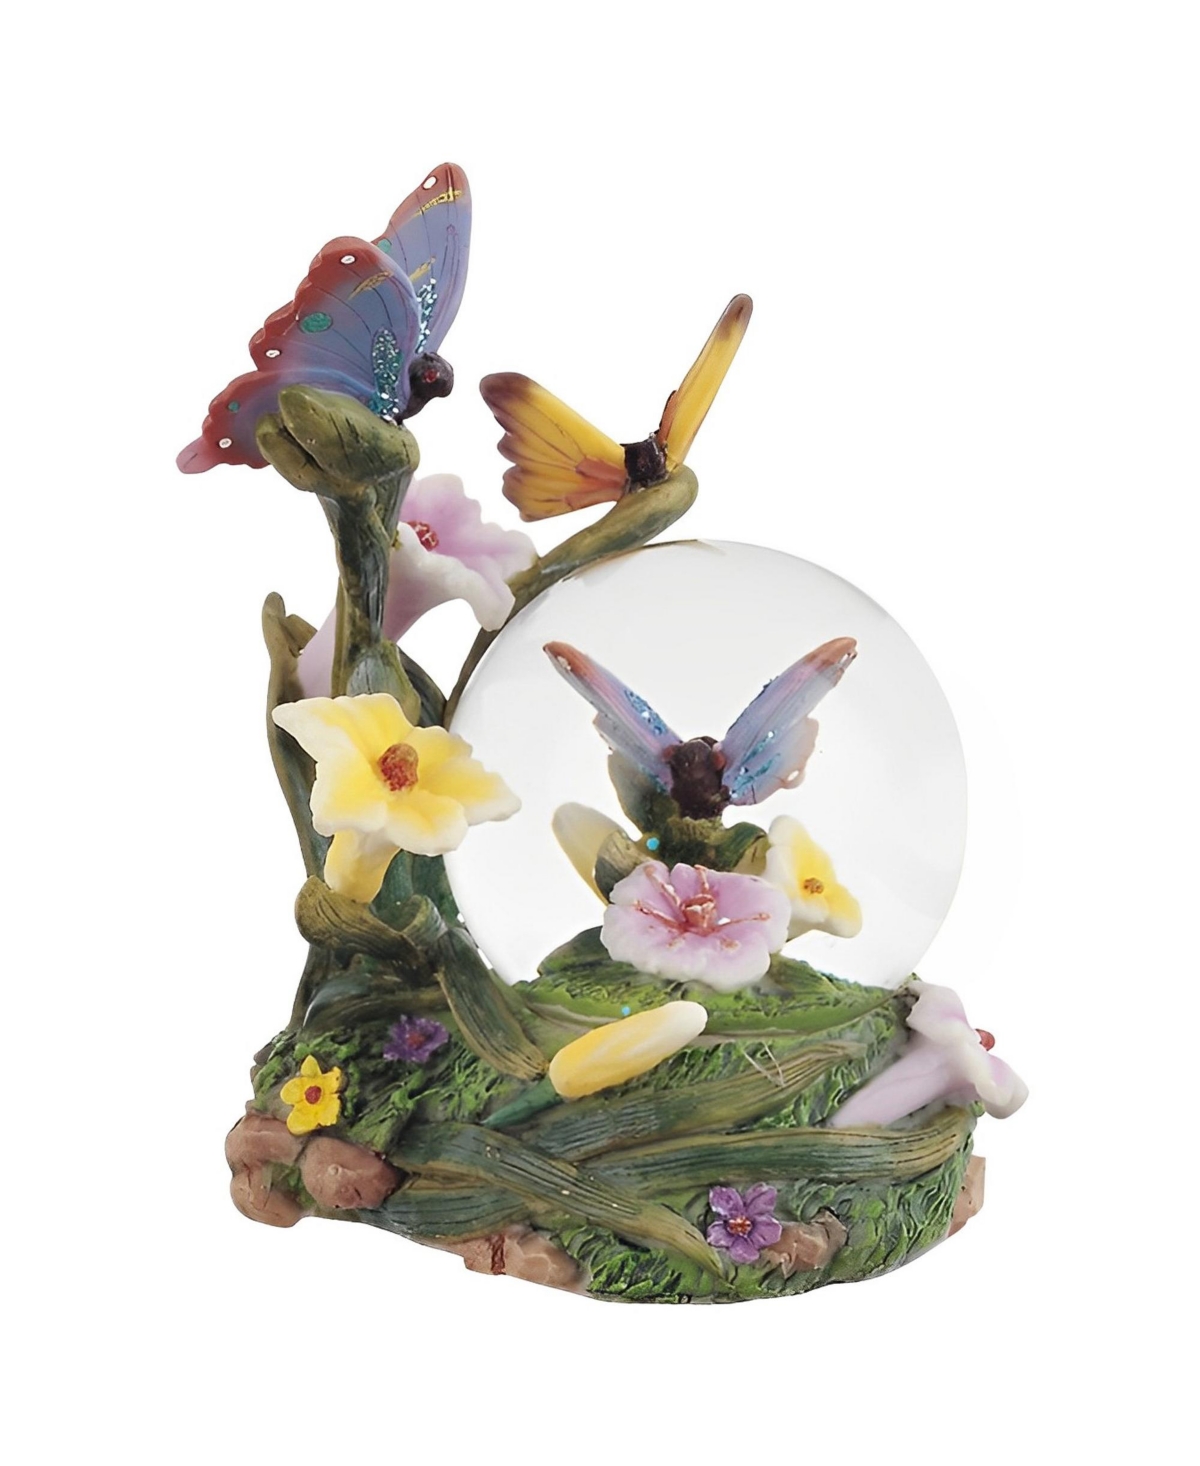 5"H Butterflies Glitter Snow Globe Home Decor Perfect Gift for House Warming, Holidays and Birthdays - Multicolor